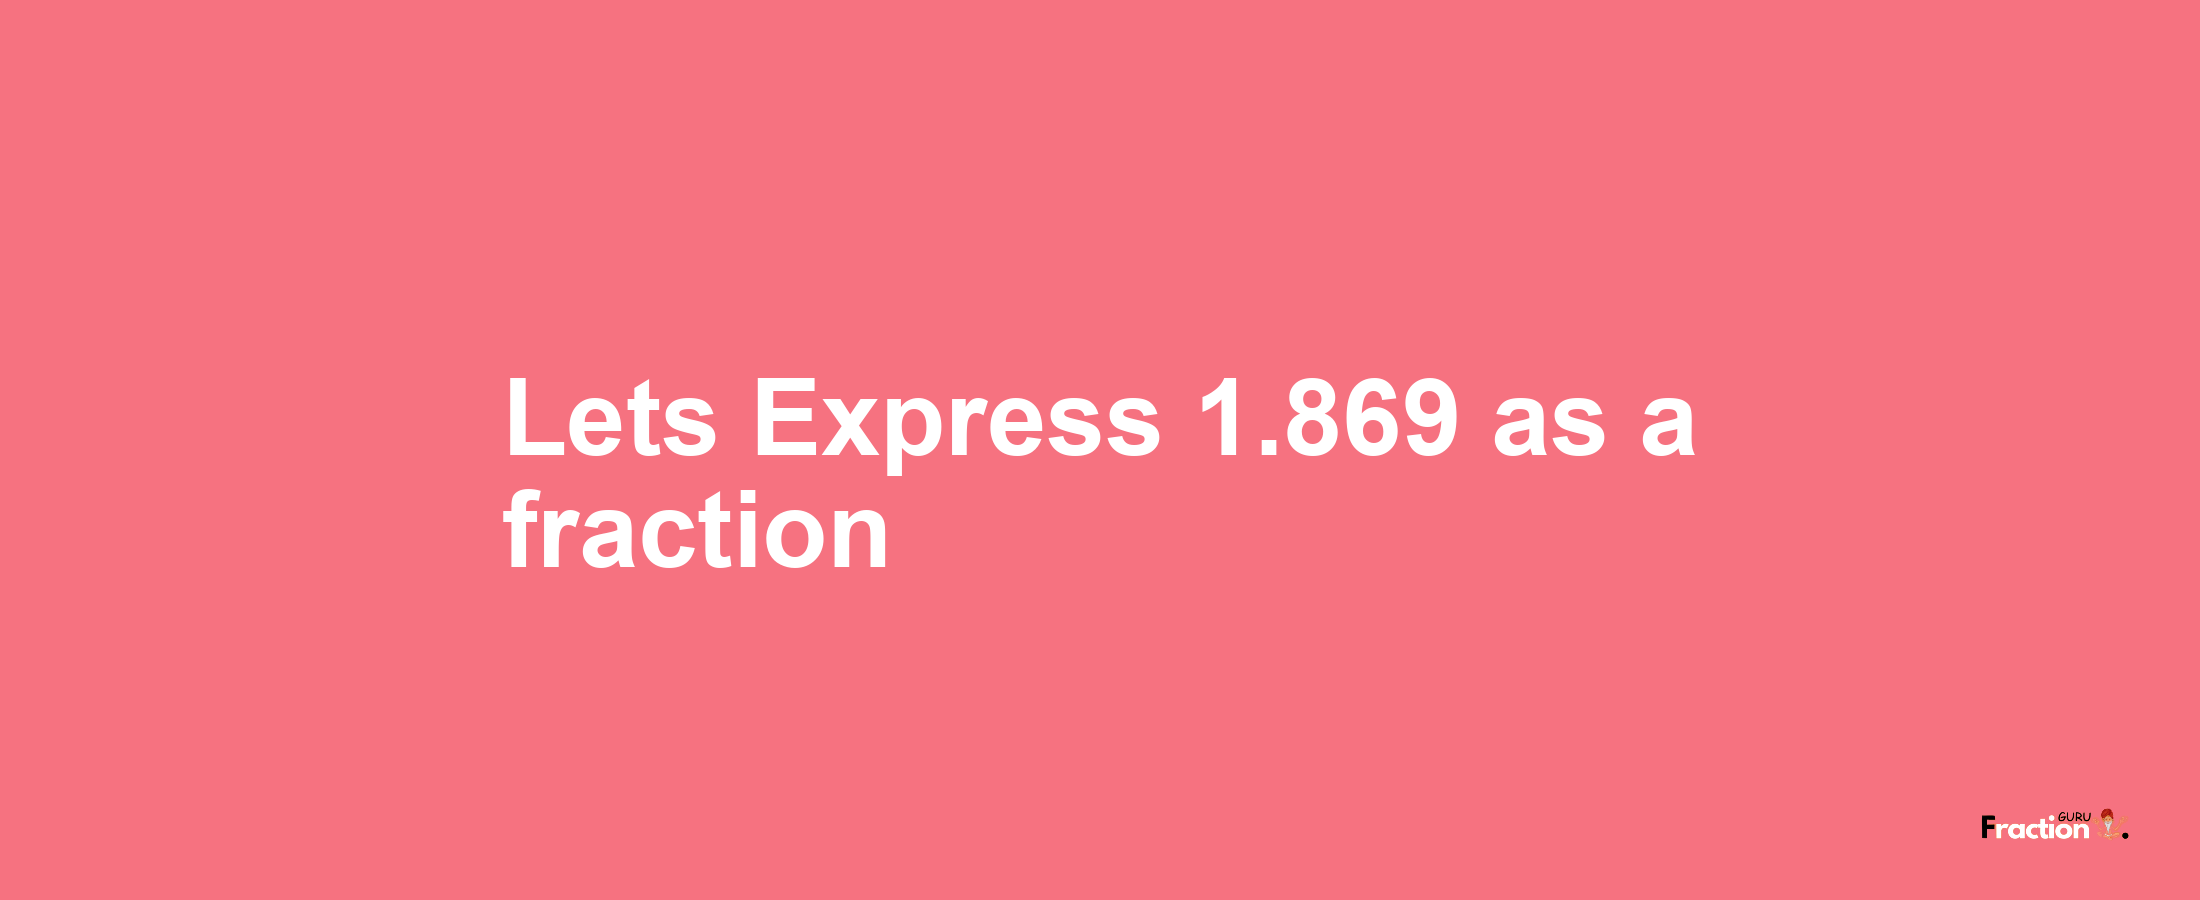 Lets Express 1.869 as afraction